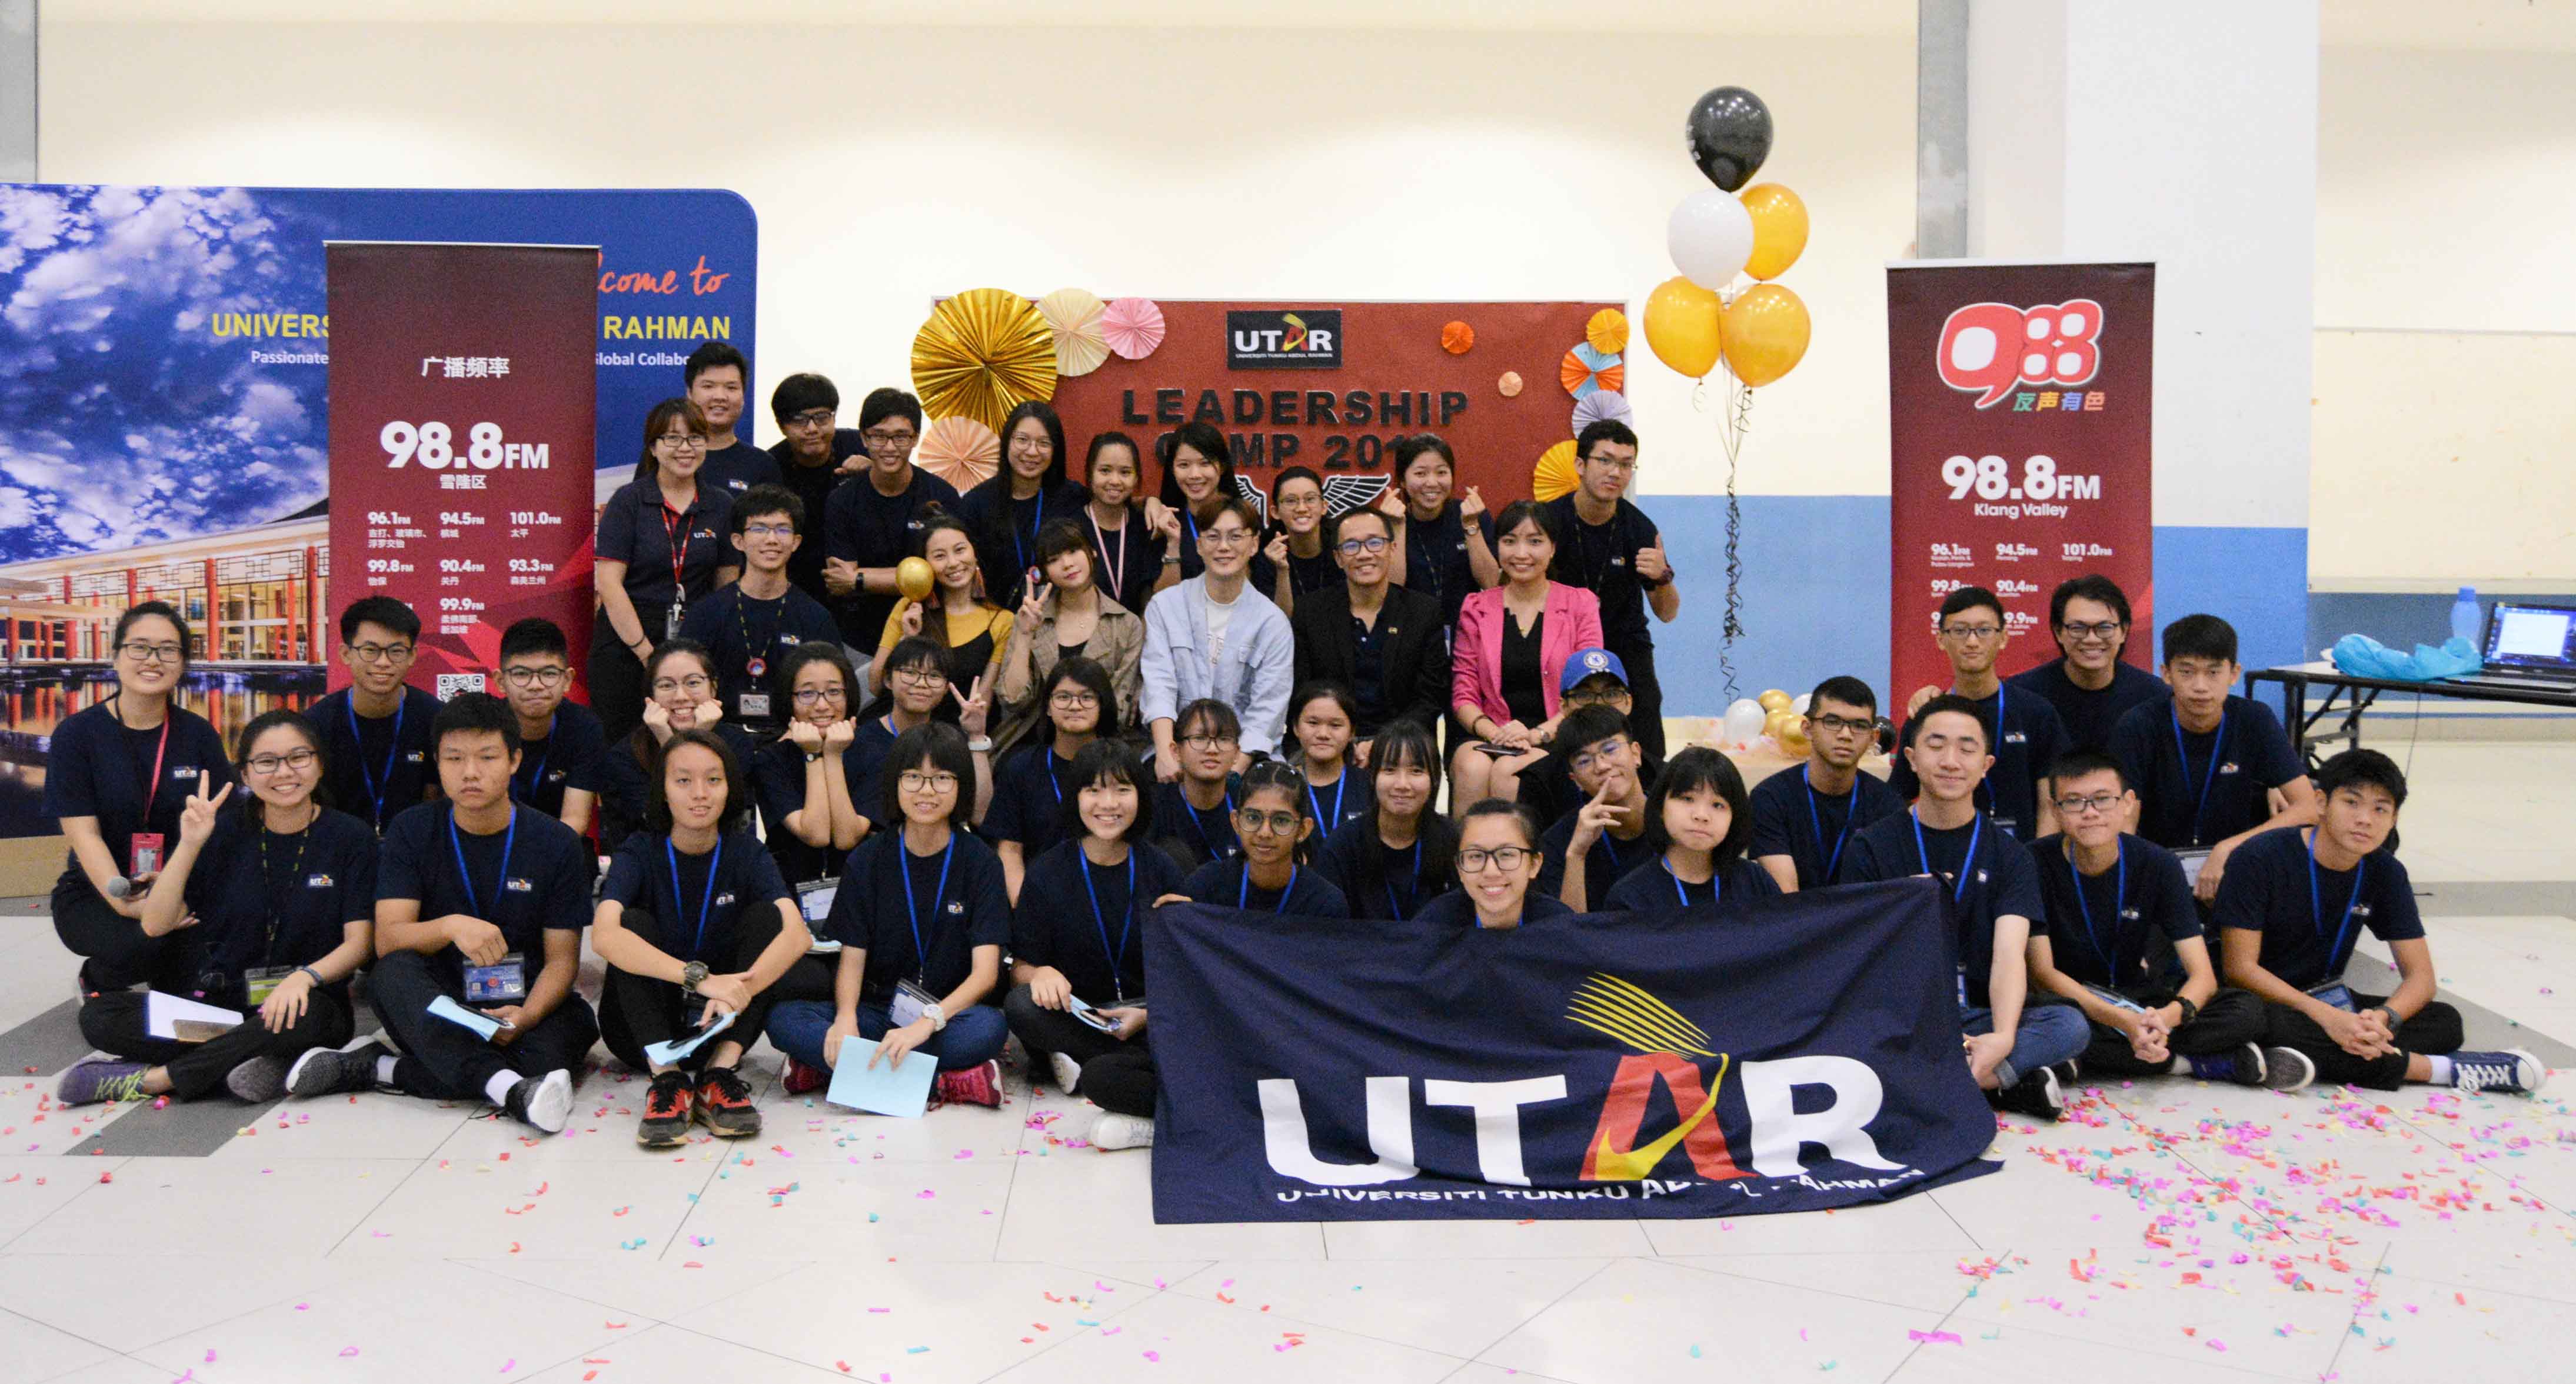 group photo of those who attended the future leaders camp by utar